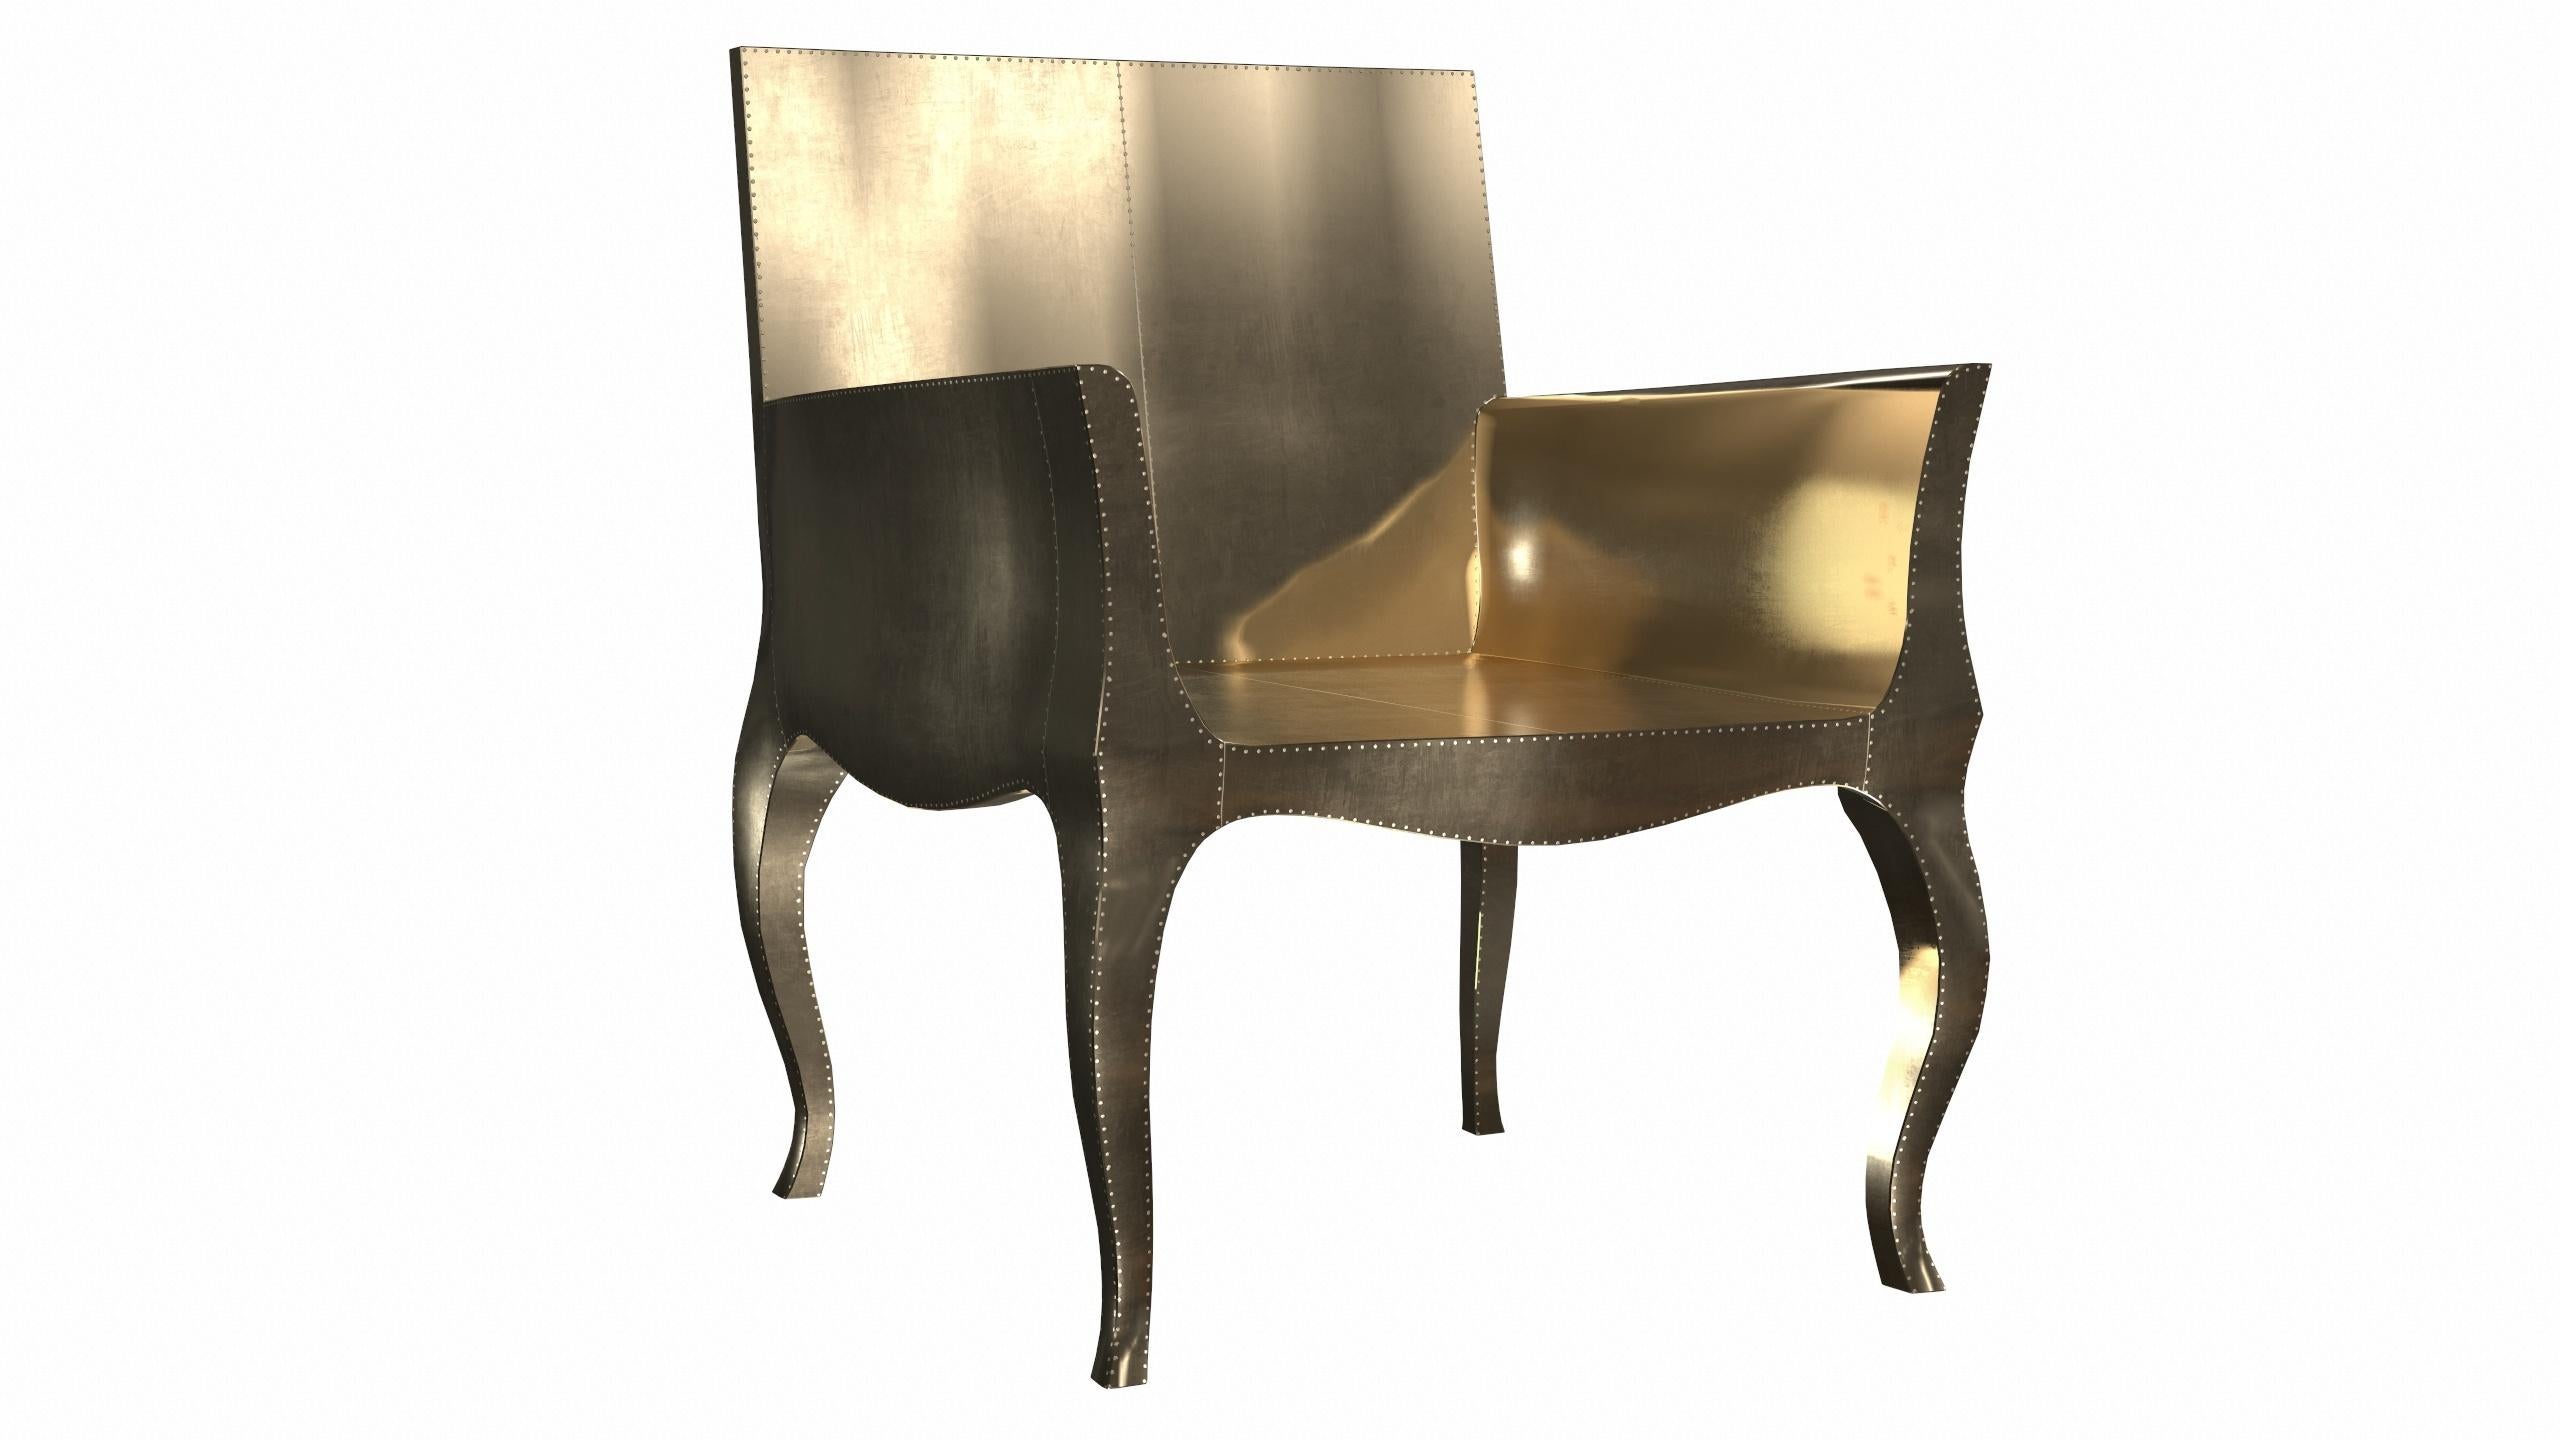 Art Deco Chairs in Smooth Brass by Paul Mathieu for S. Odegard In New Condition For Sale In New York, NY